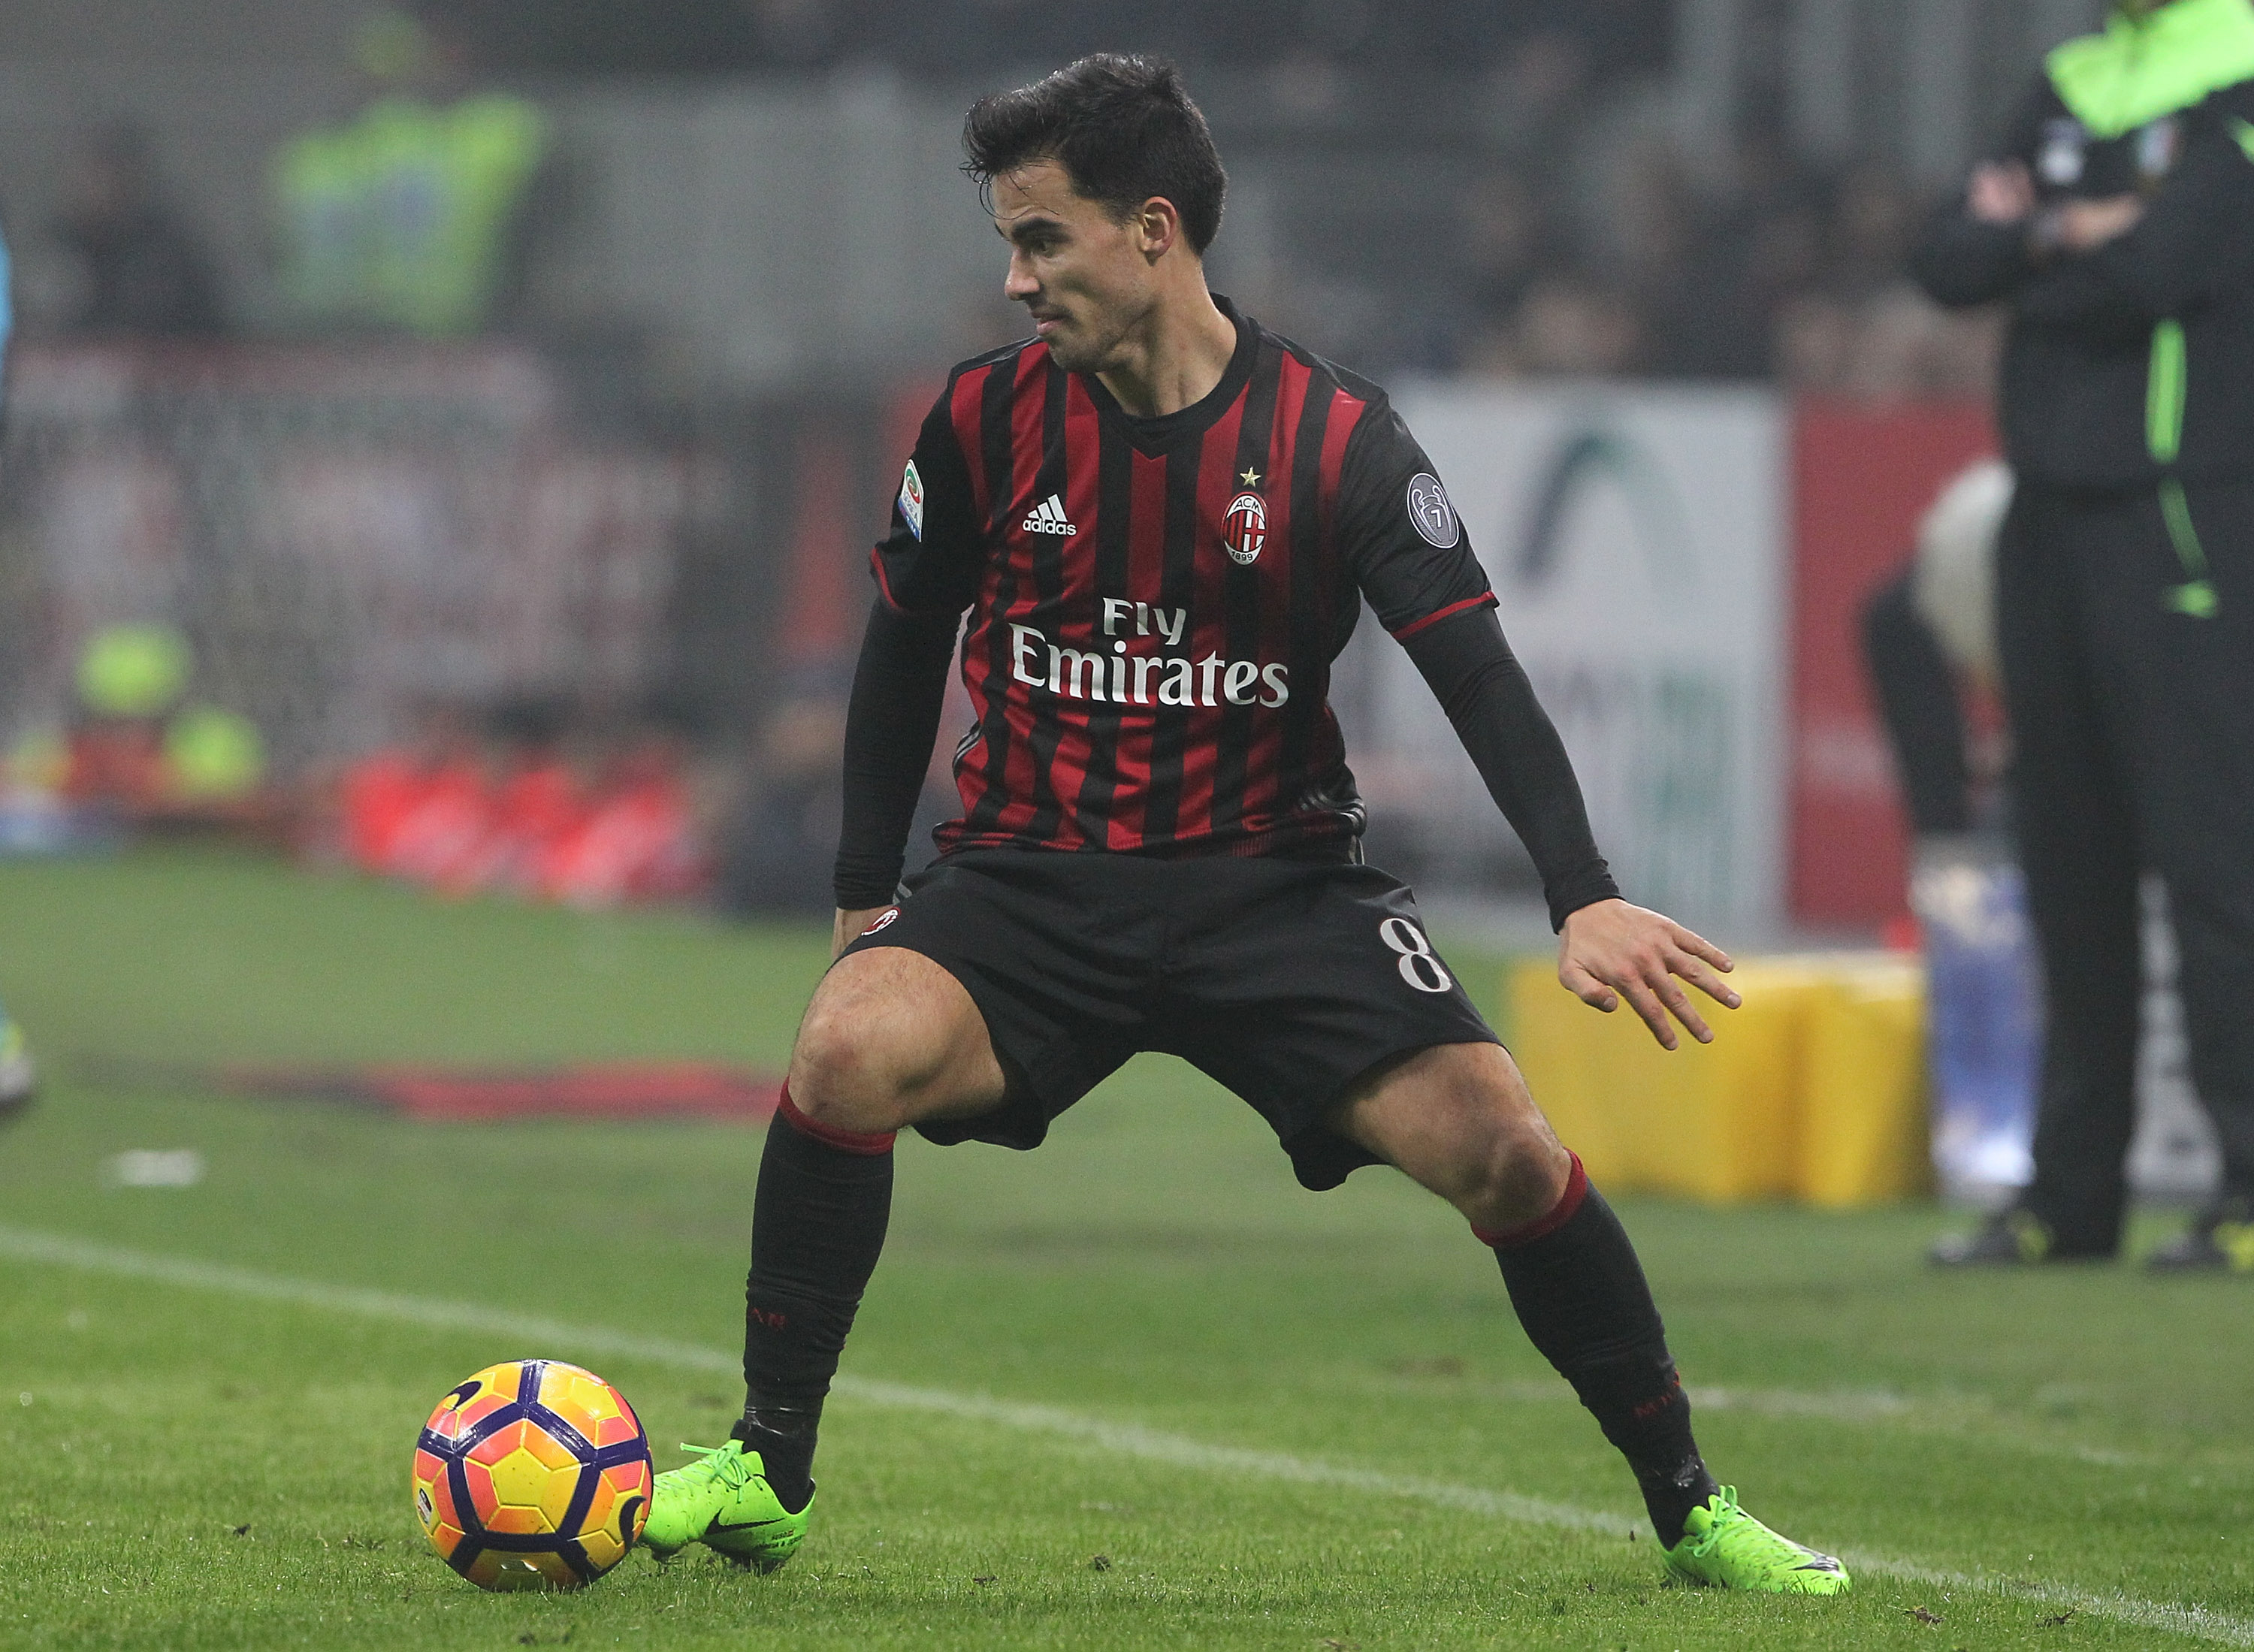 MILAN, ITALY - FEBRUARY 19:  Fernandez Suso of AC Milan in action during the Serie A match between AC Milan and ACF Fiorentina at Stadio Giuseppe Meazza on February 19, 2017 in Milan, Italy.  (Photo by Marco Luzzani/Getty Images)